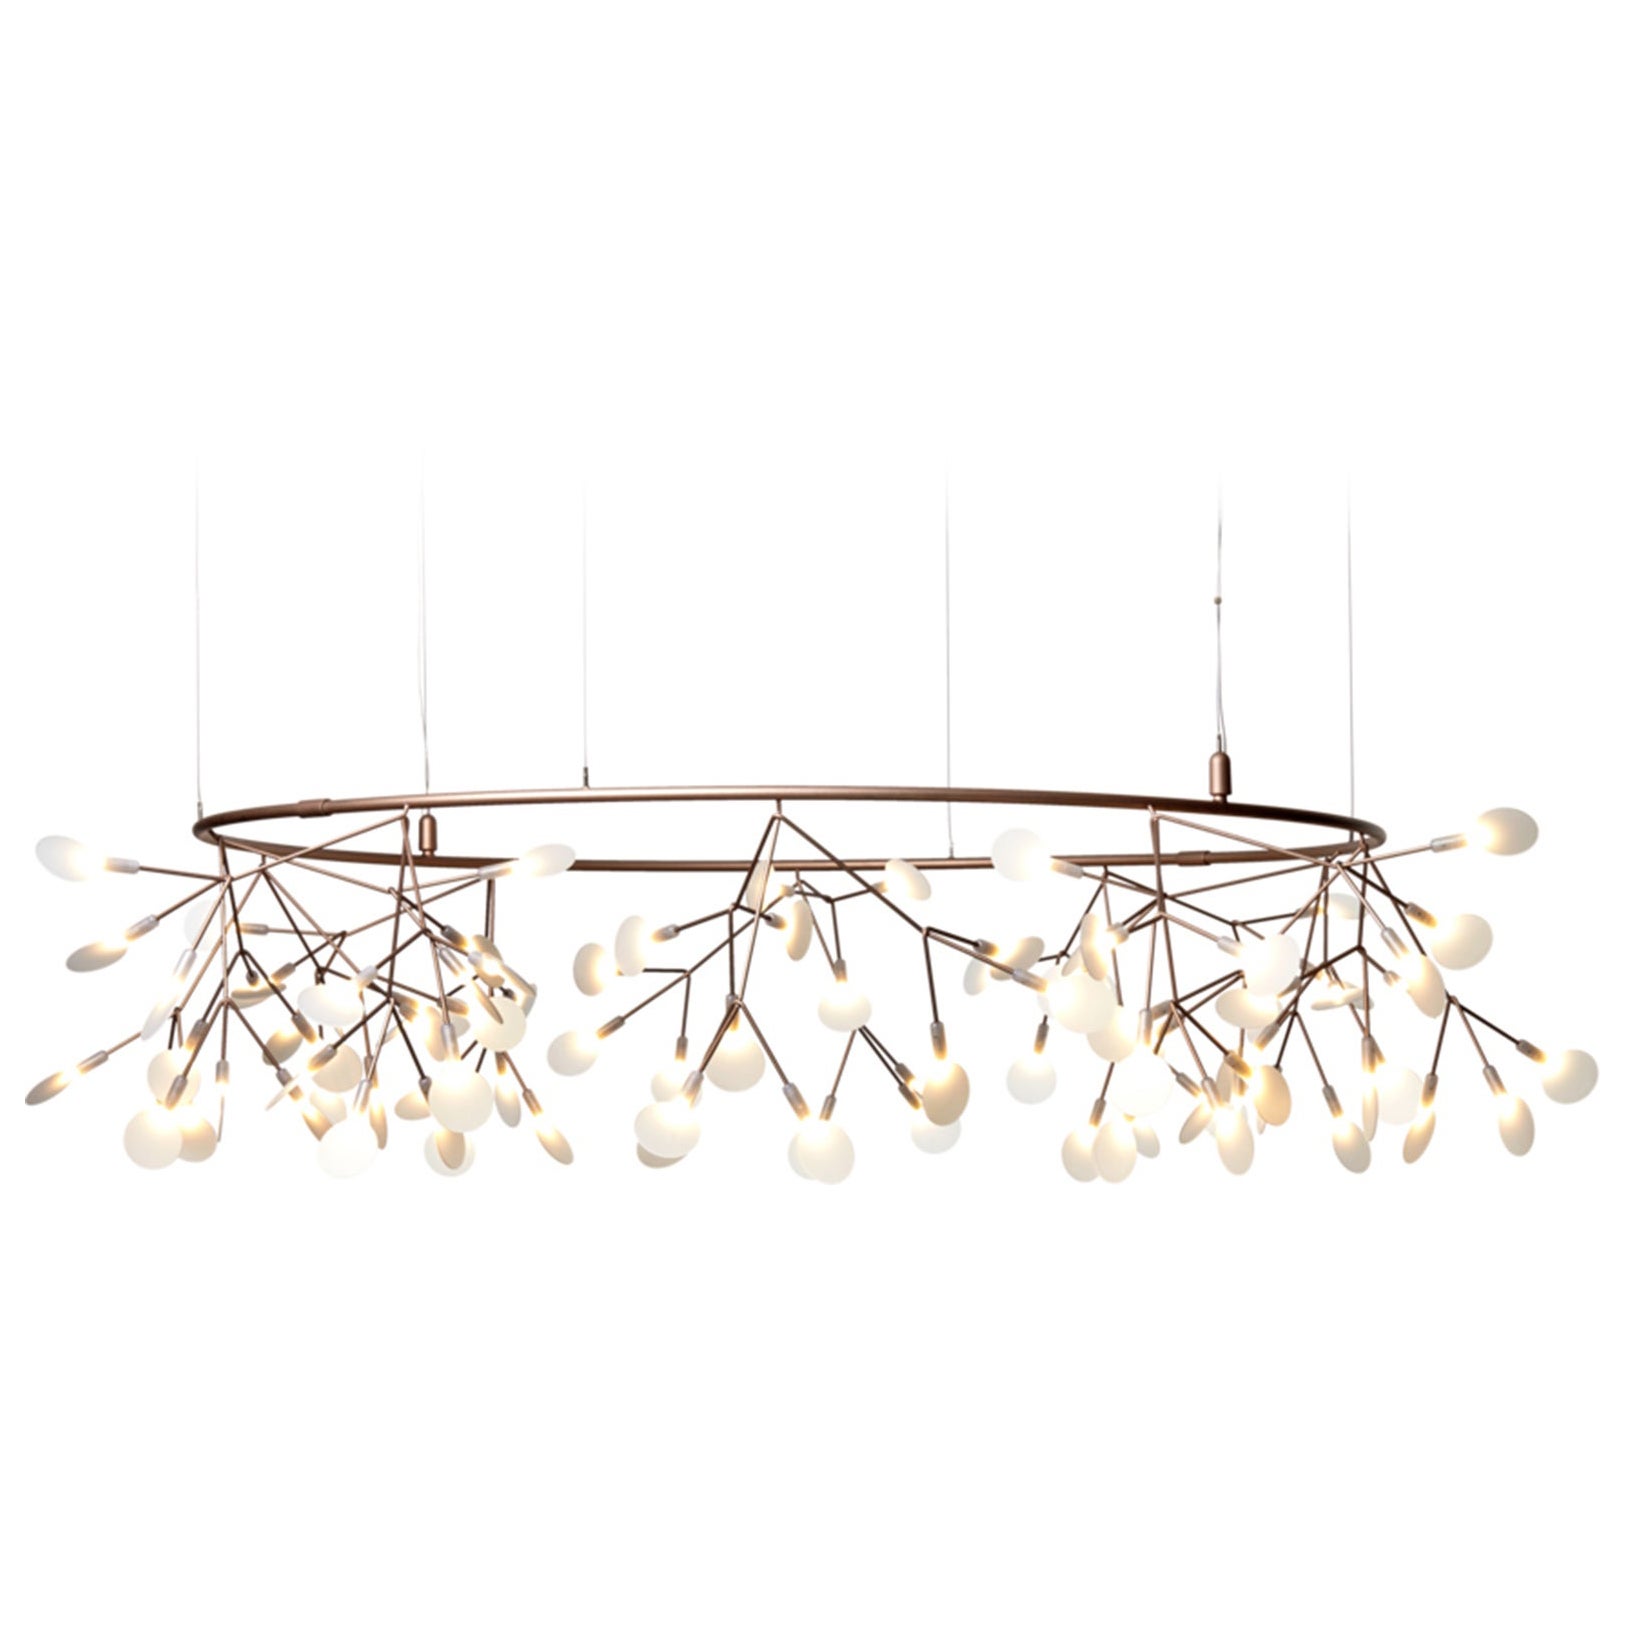 Moooi Heracleum The Big O Small Suspension Lamp in Copper by Bertjan Pot For Sale